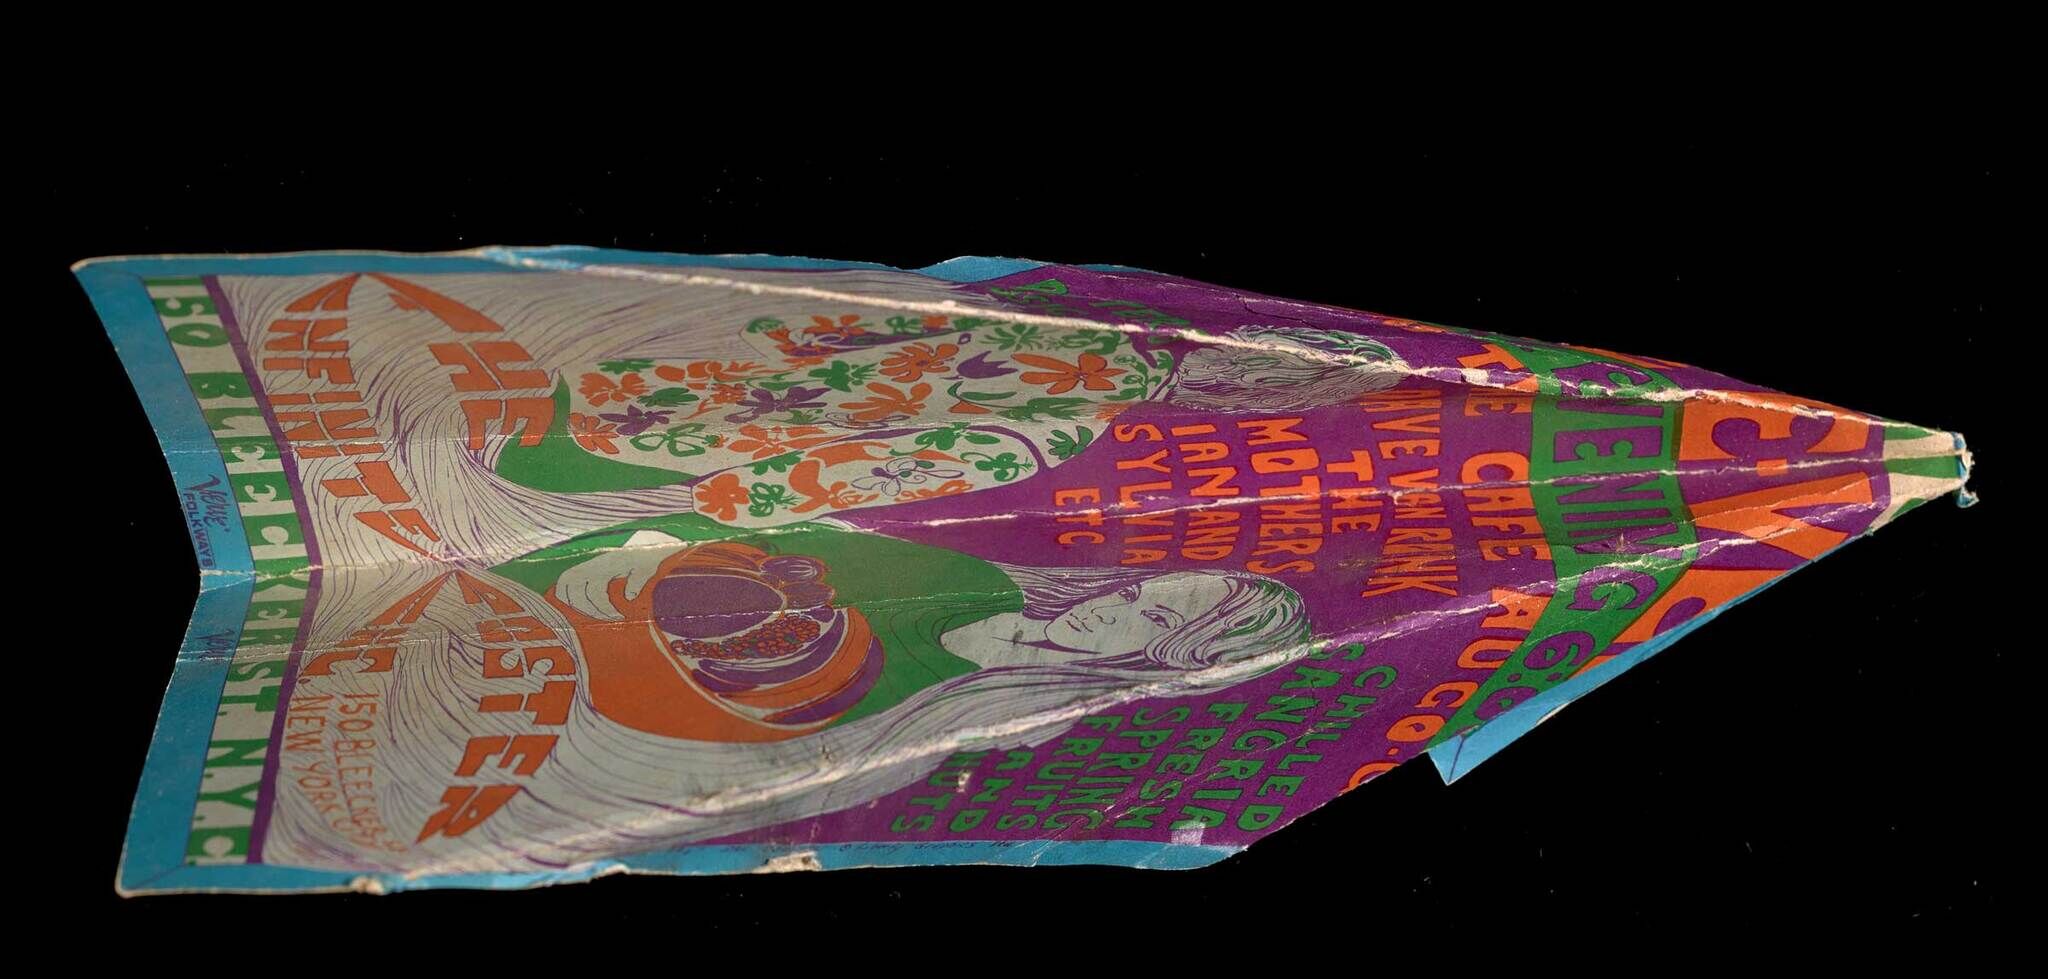 A sheet of white paper with drawings in blue, green, pink, and orange, folded into a paper airplane.